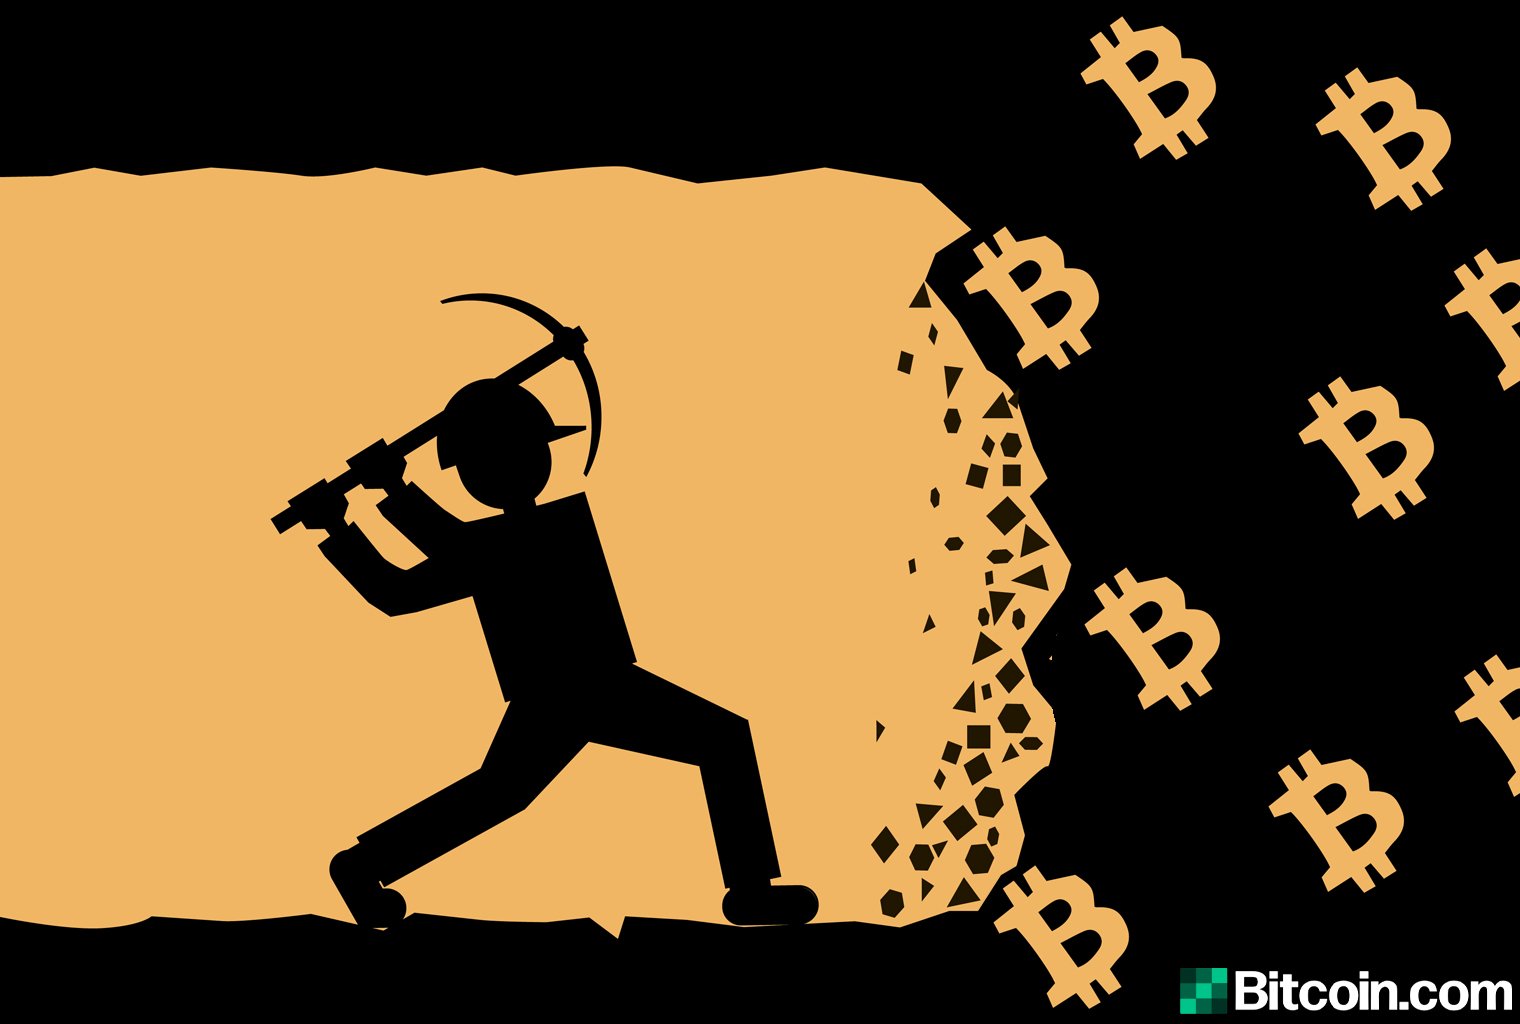 Bitcoin Hashrate Down 45% - Miners Witness Second-Largest Difficulty Drop in History